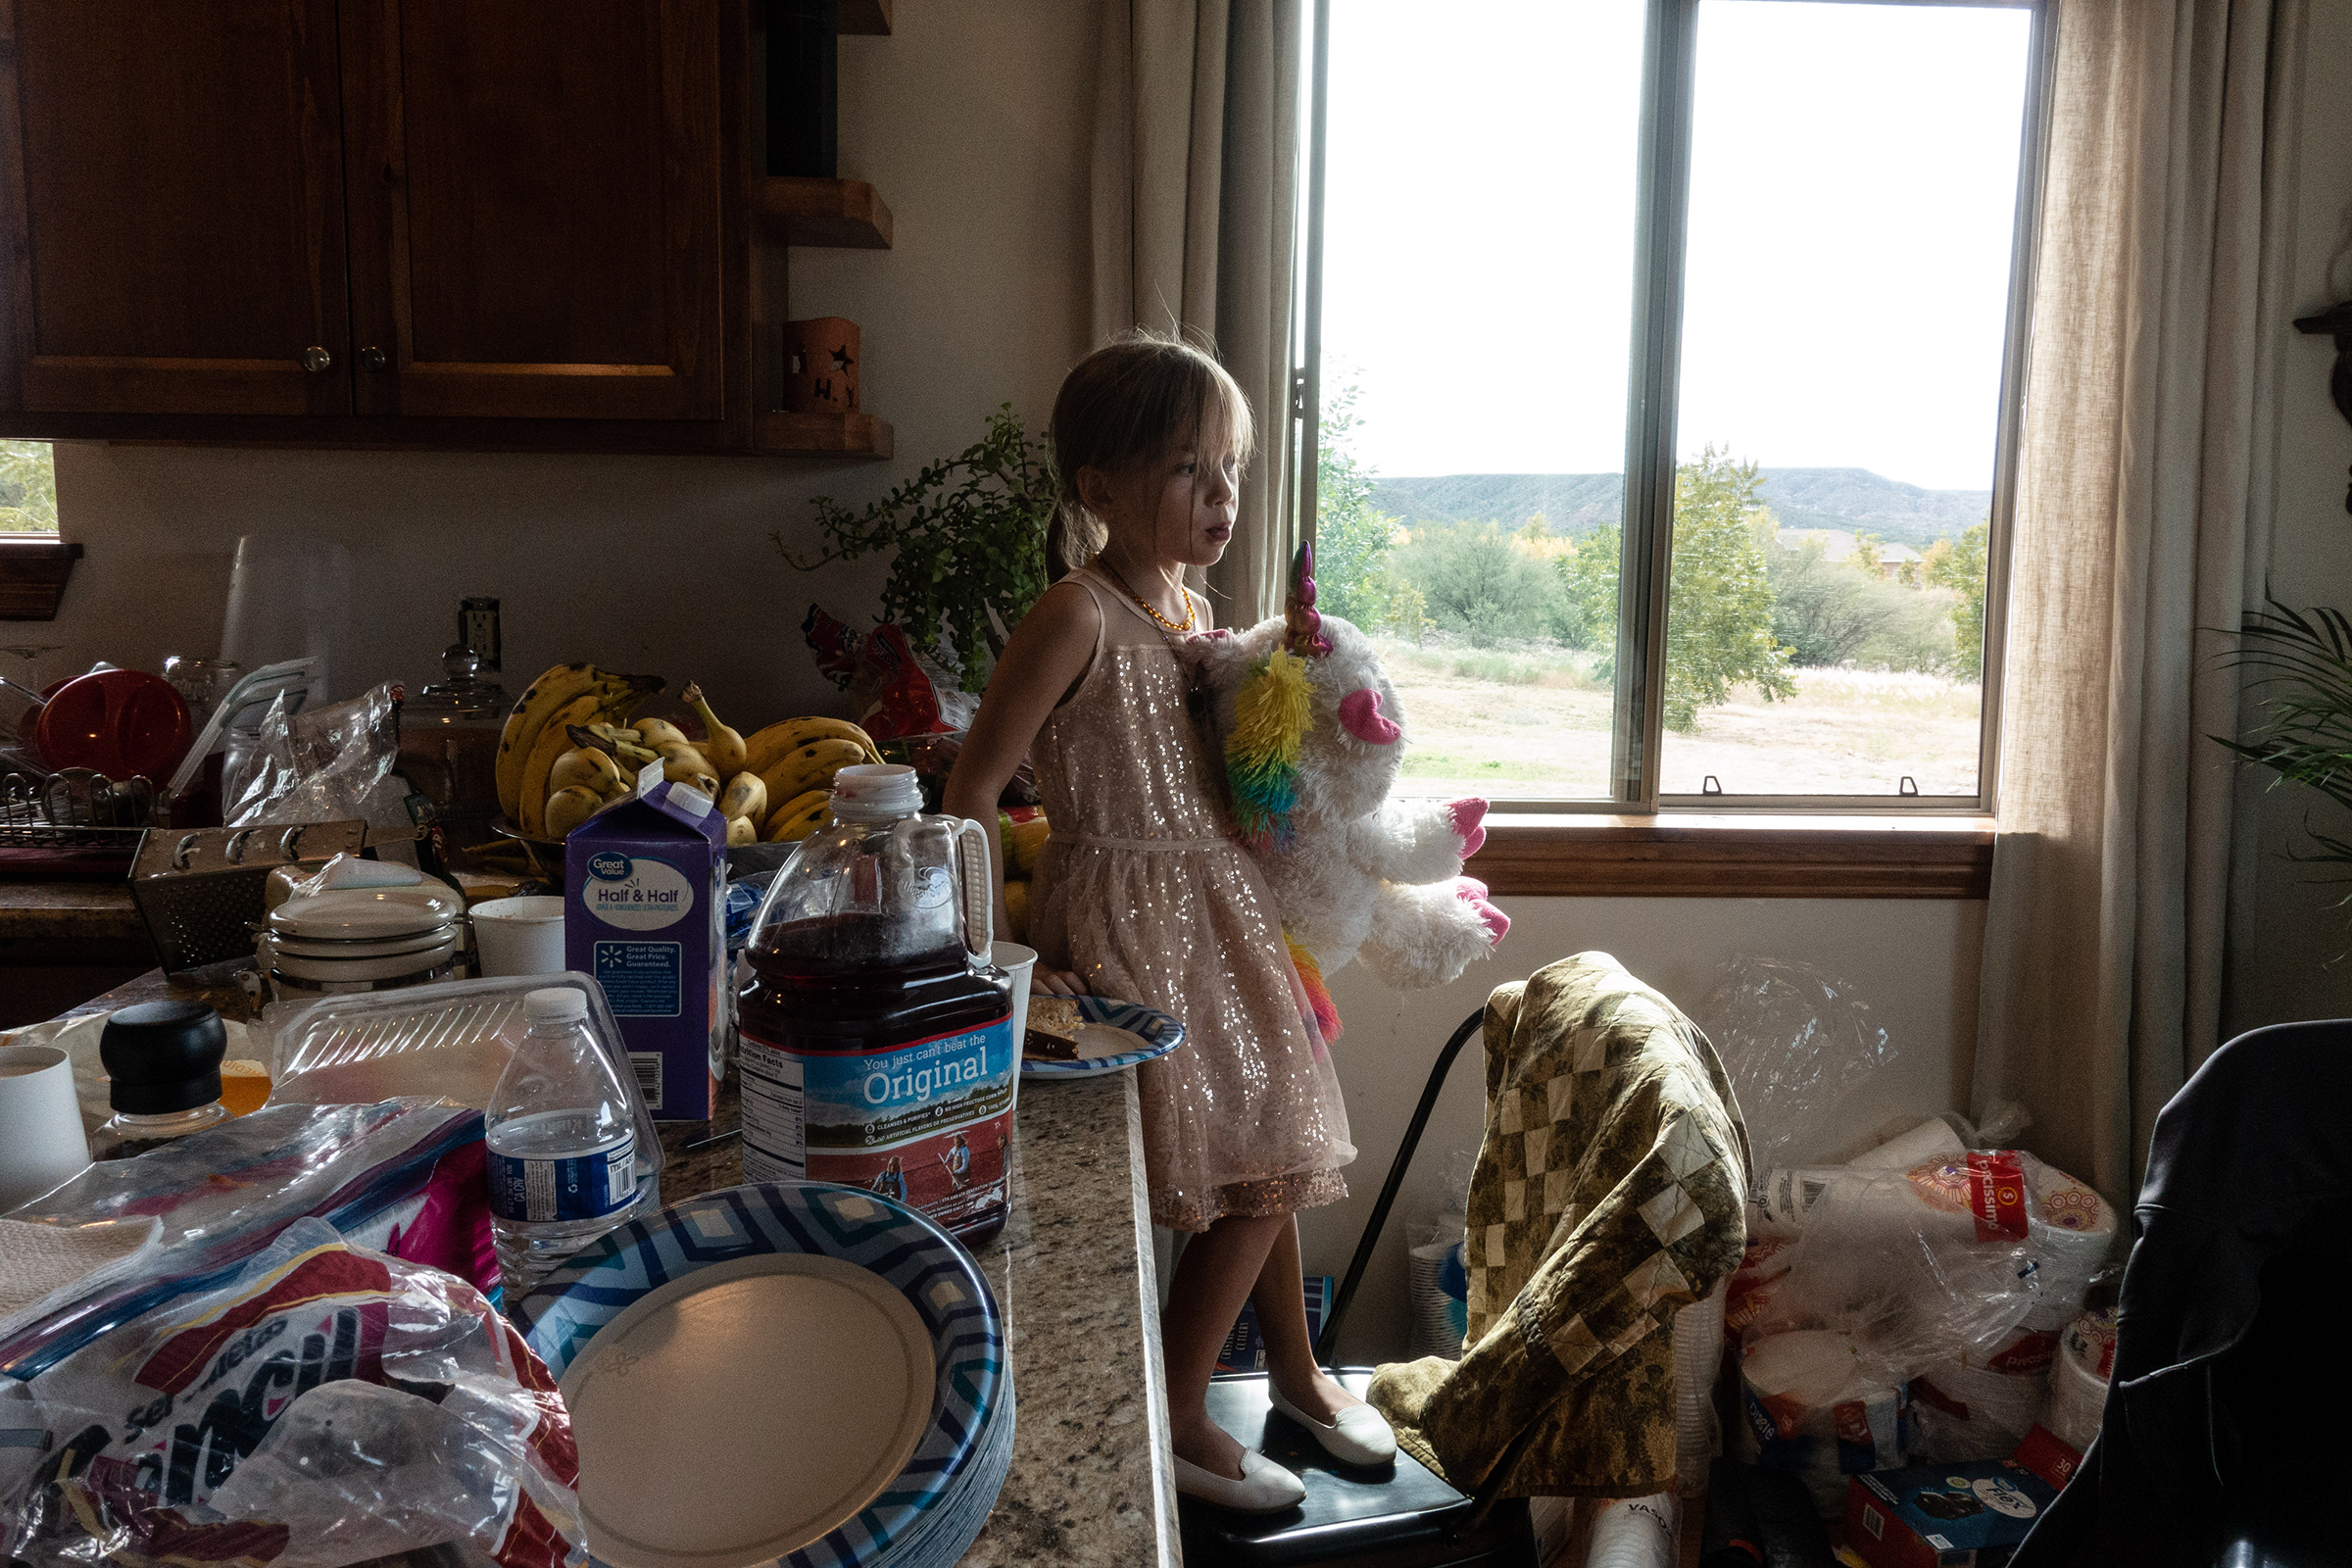 Amaryllis Miller, 5, one of Rhonita Miller’s daughters, plays with a stuffed unicorn at the house. (César Rodríguez—El País)